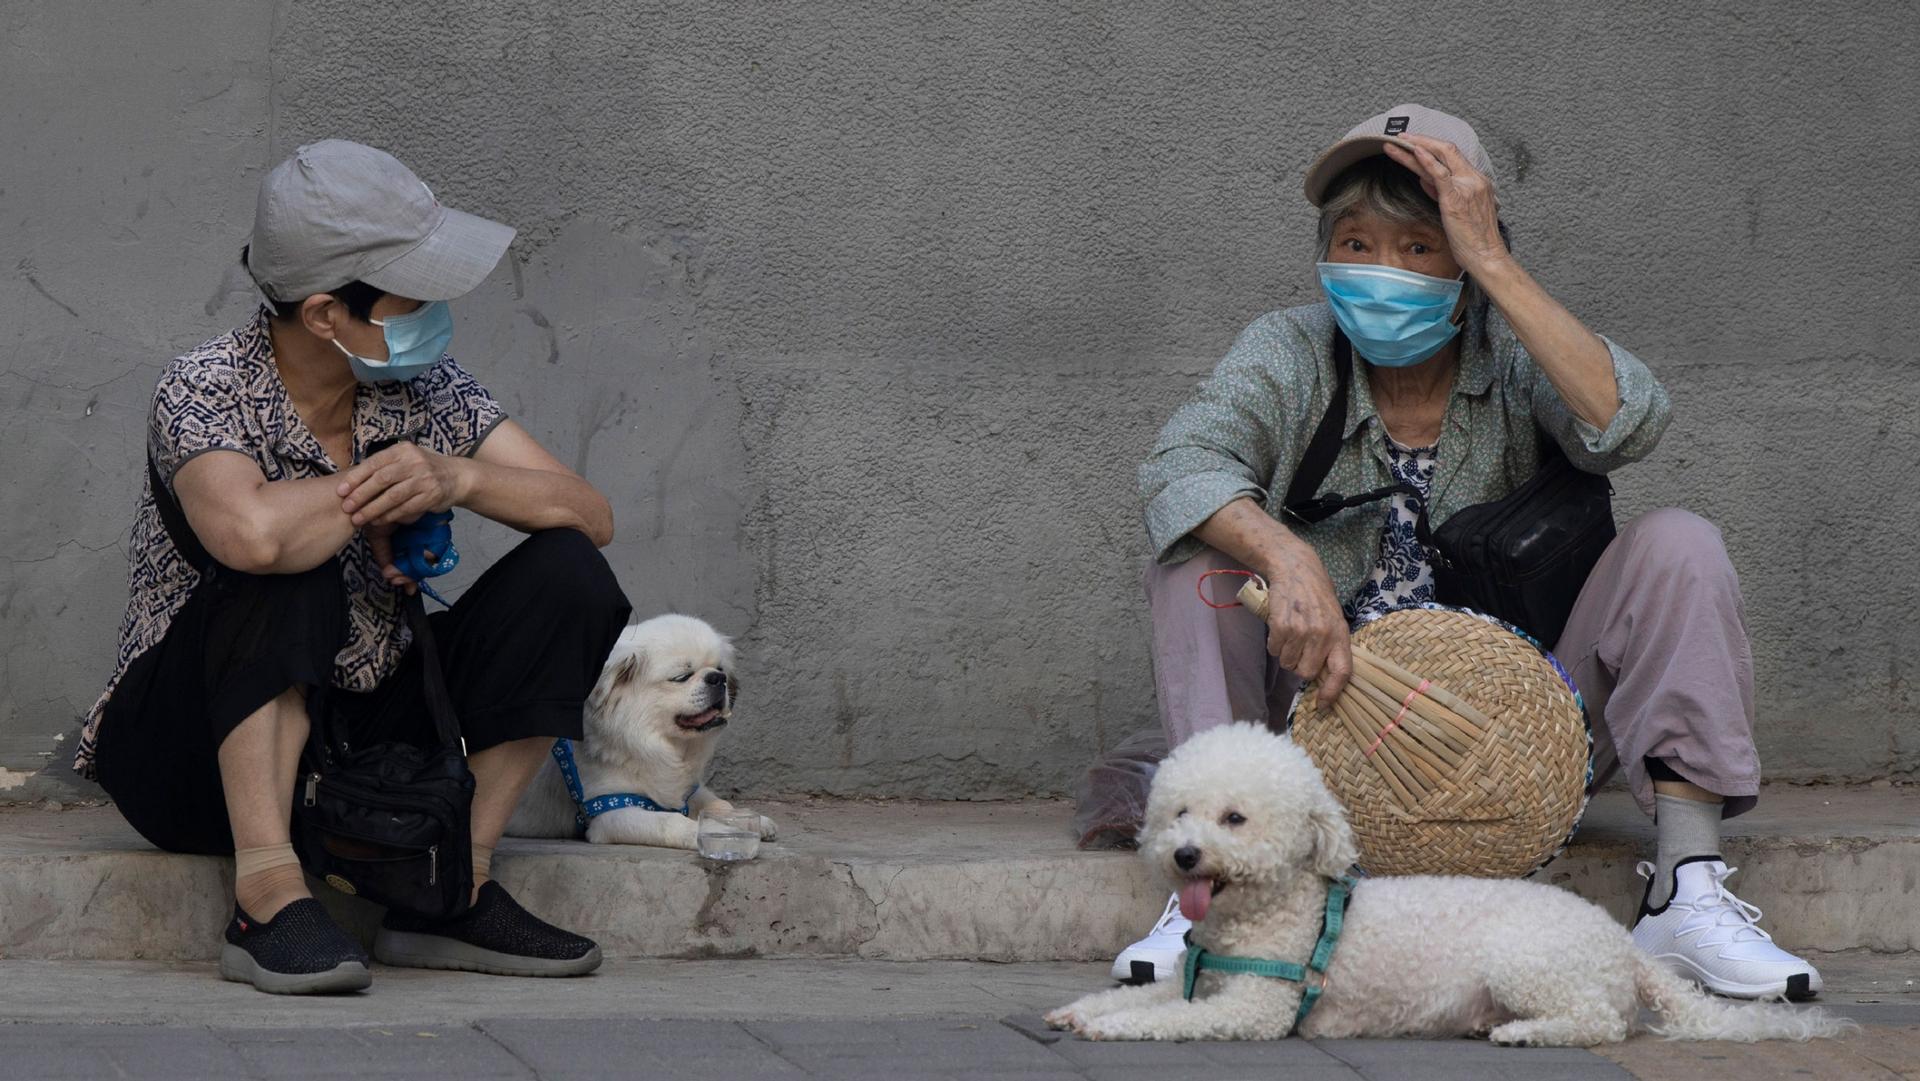 Two women are shown sitting on a small curb and wearing hats and protective facemasks with two small white dogs also sitting nearby.